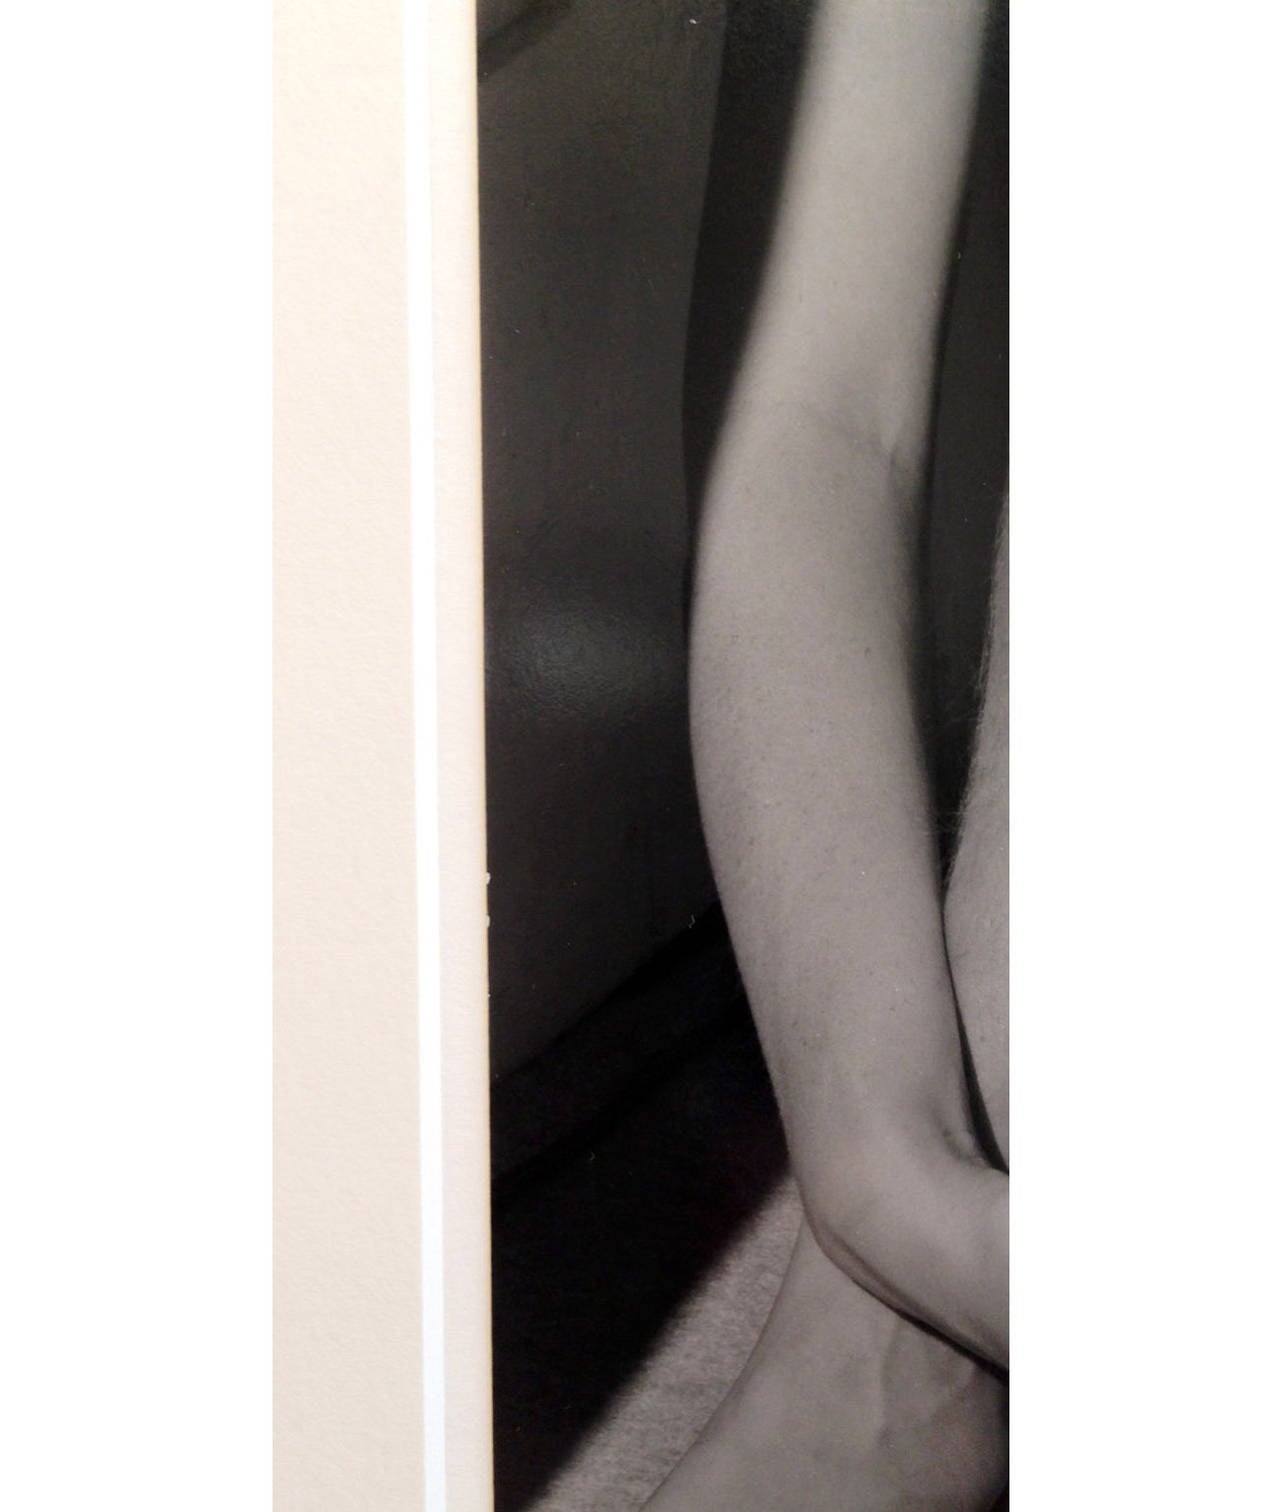 Nude ~ 227N - Gray Nude Photograph by Edward Weston